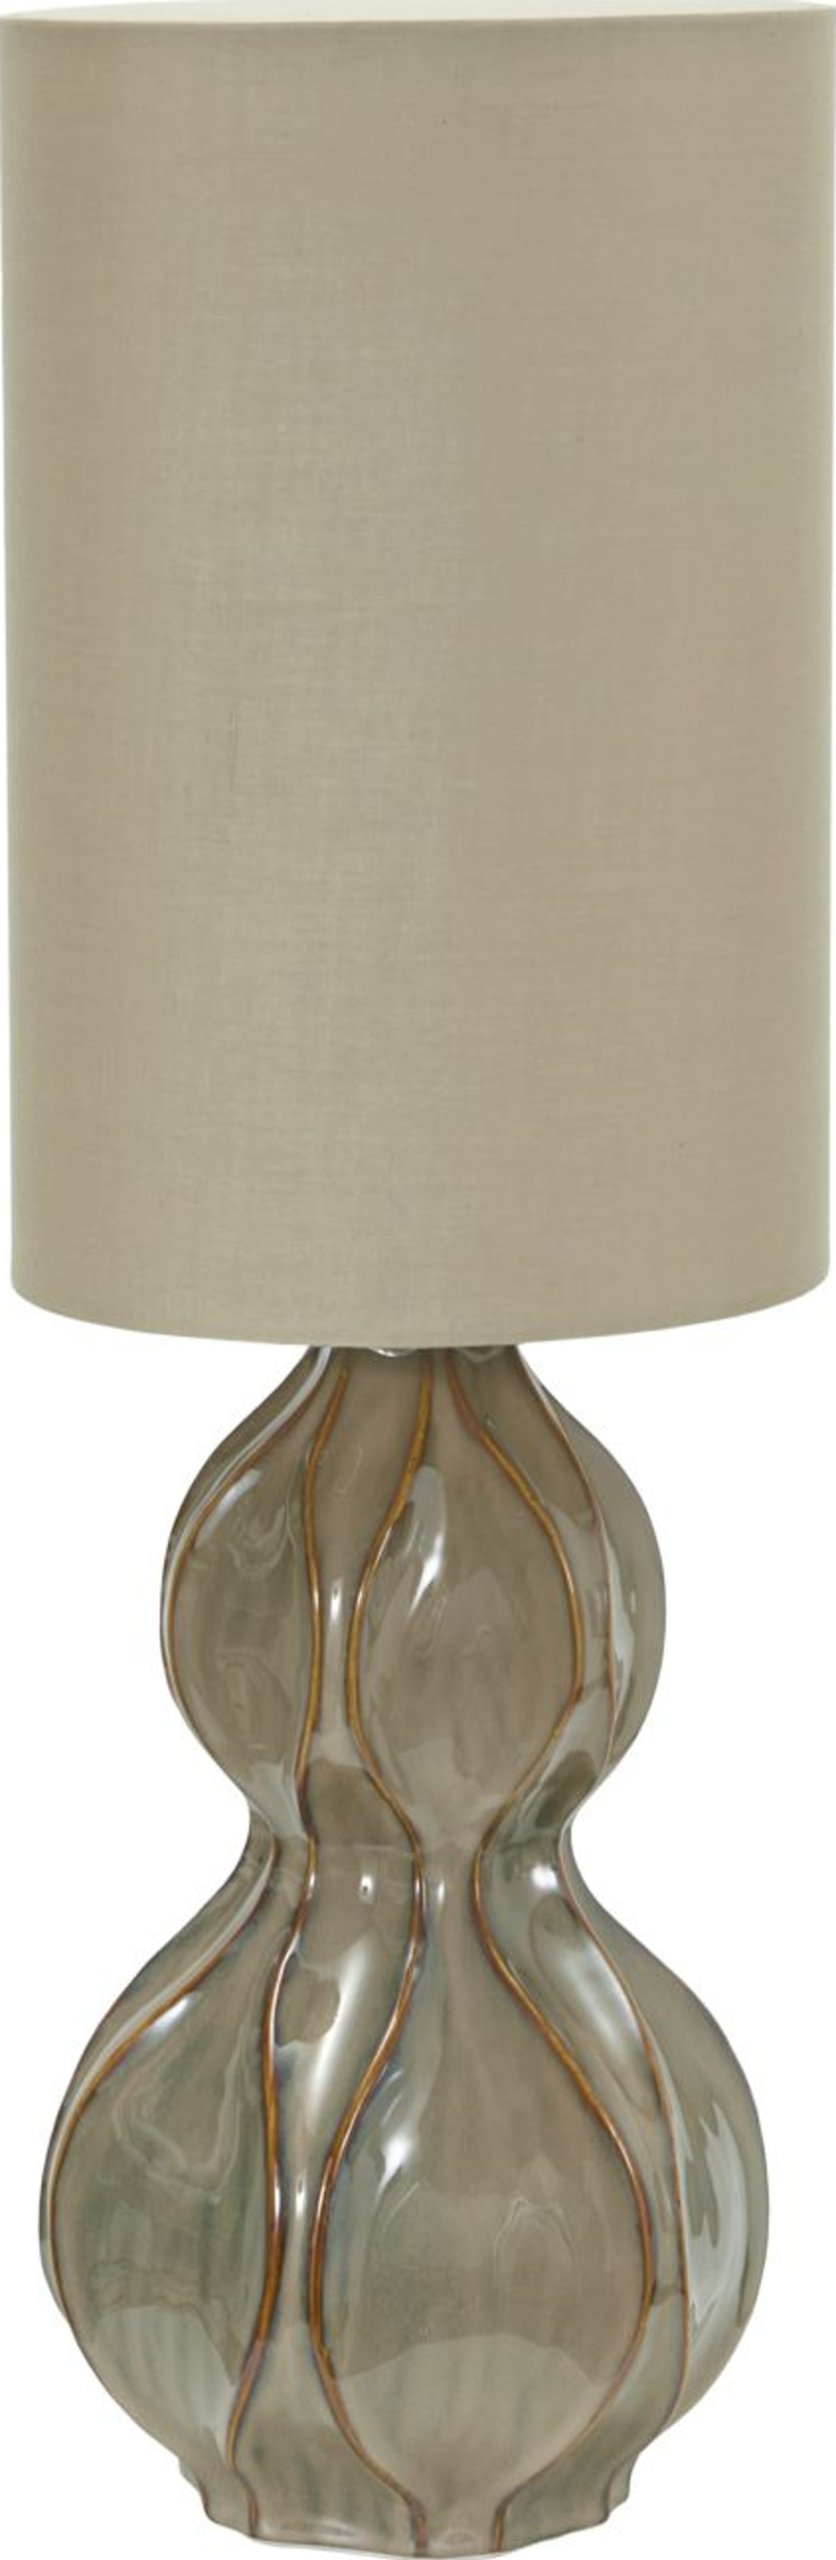 Woma, Bordlampe by House Doctor (D: 22 cm. x H: 69 cm., Sand)